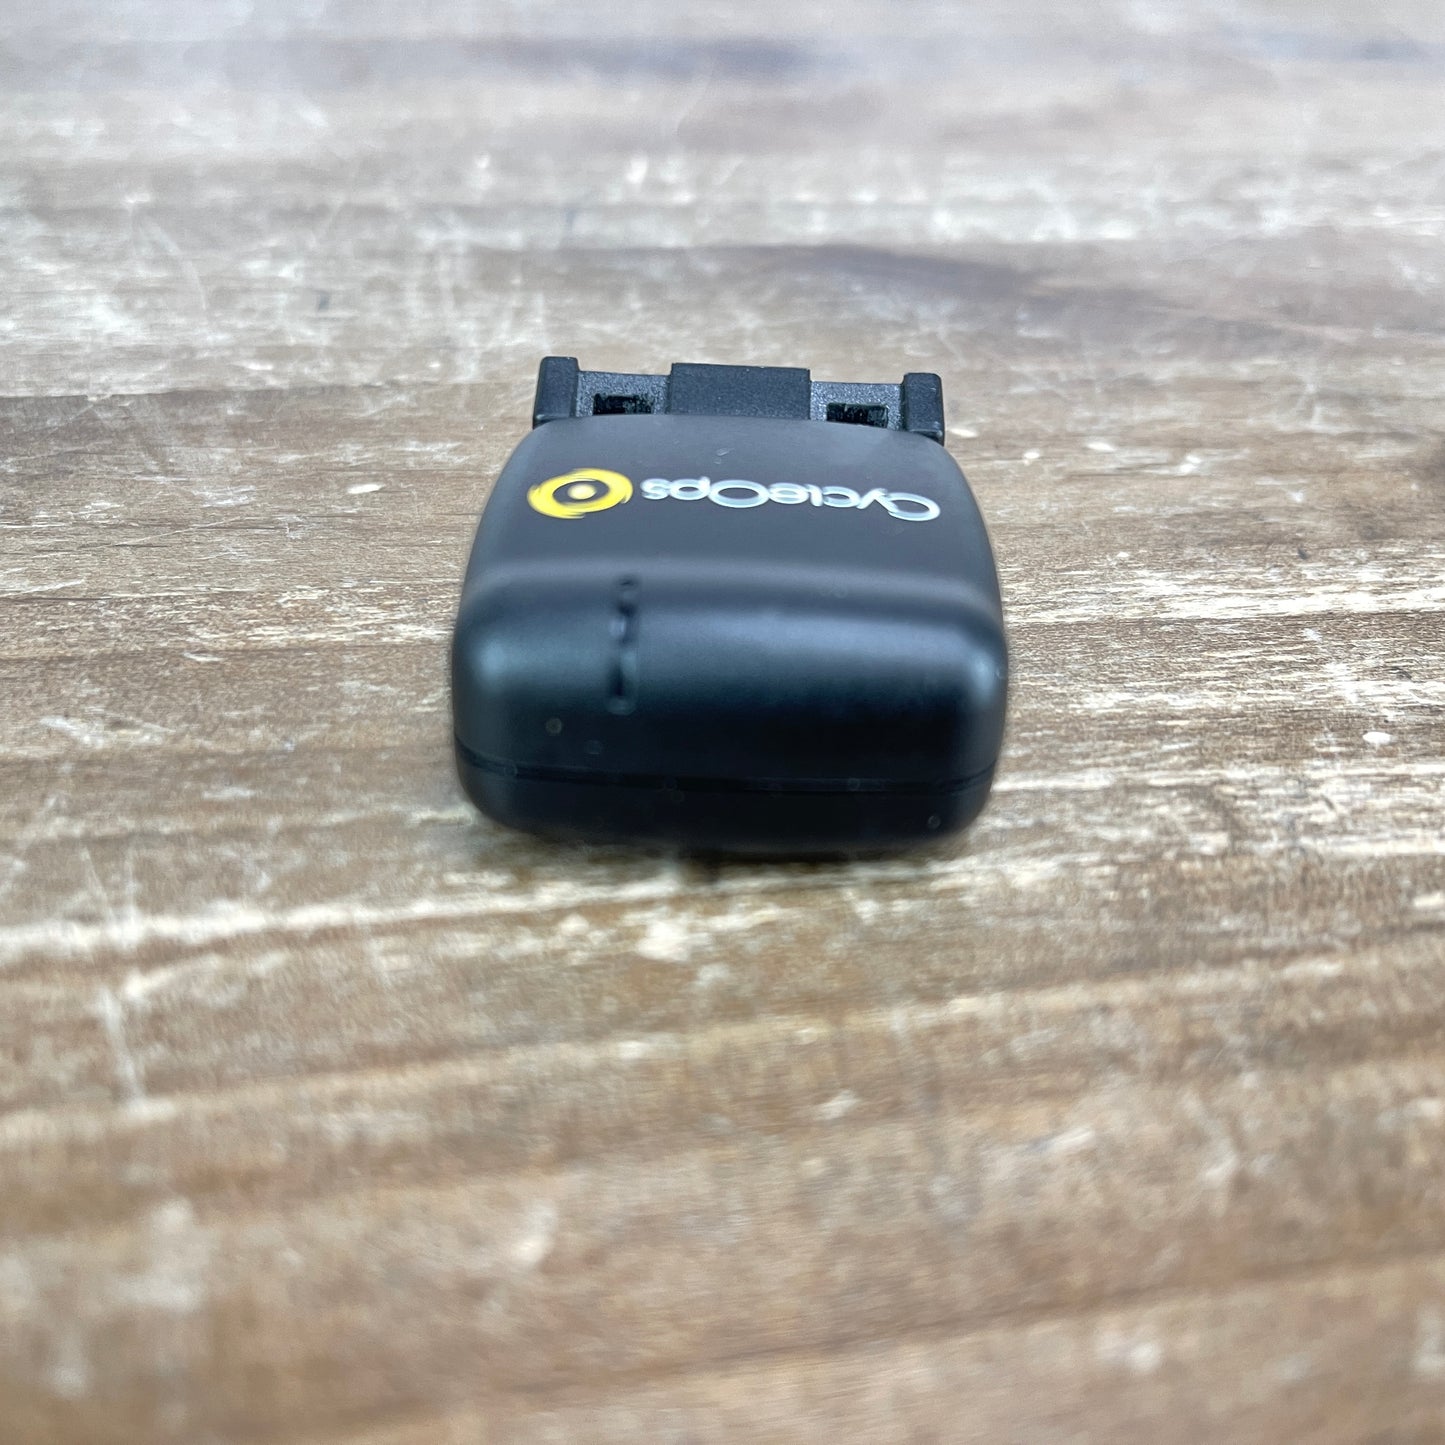 CycleOps Speed or Cadence Bicycle Wireless Sensor